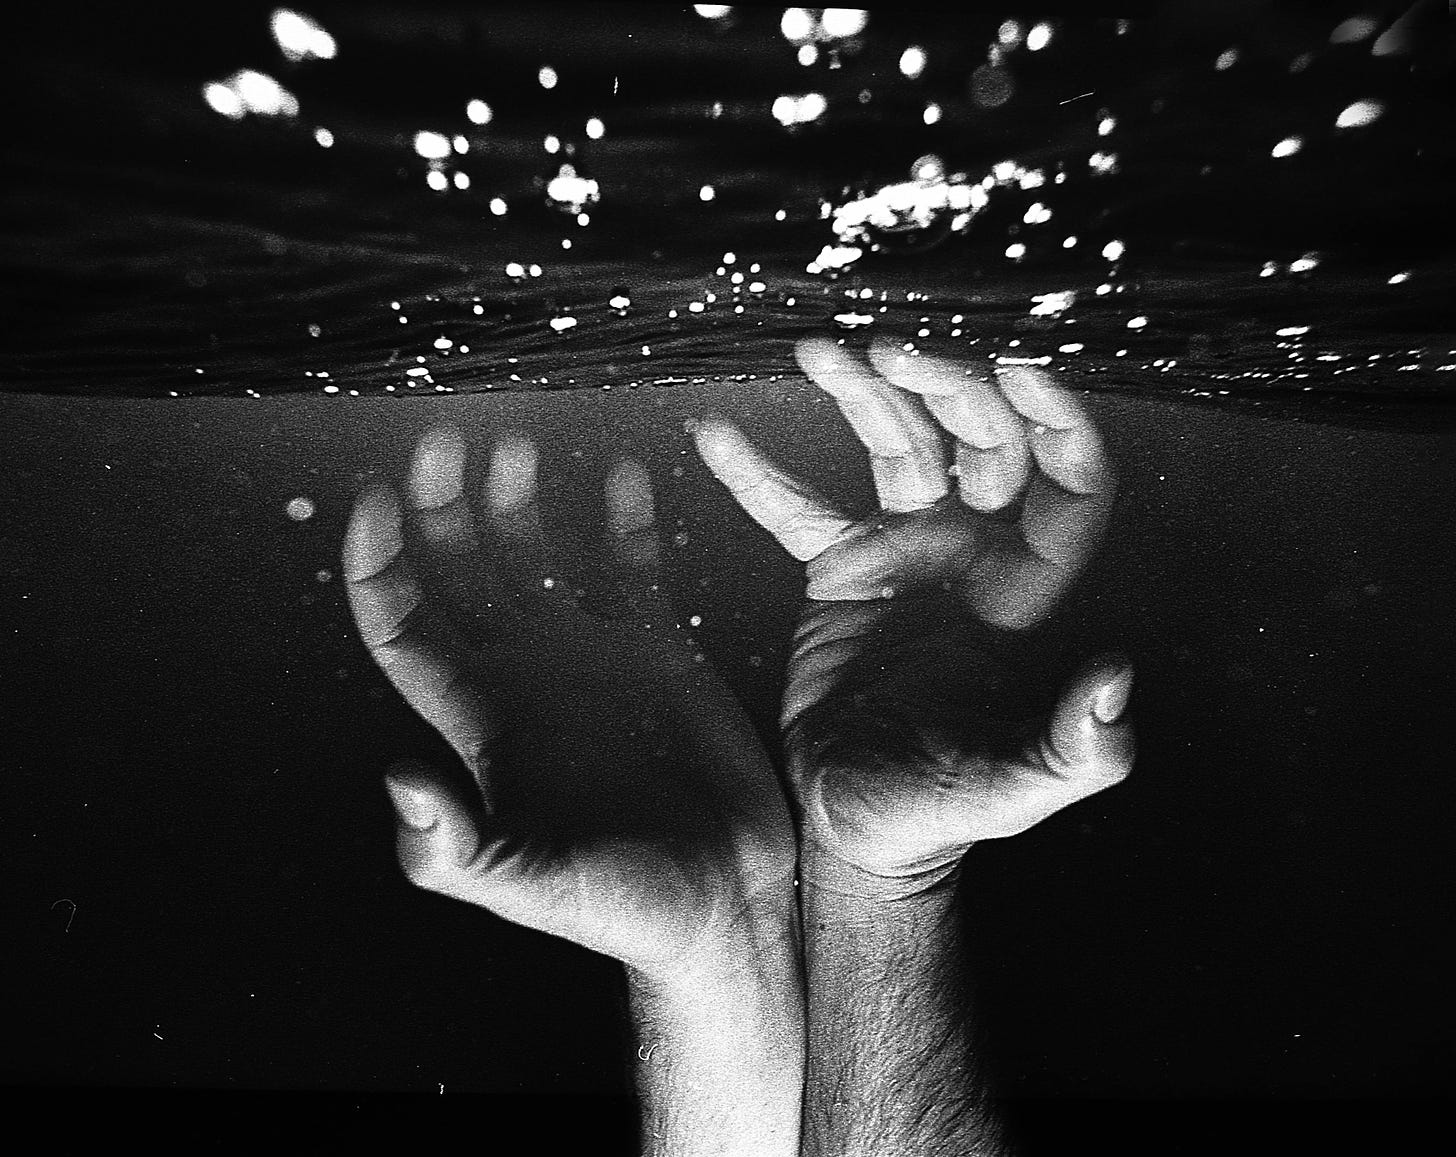 Black and white photo of hands under water reaching for the top.